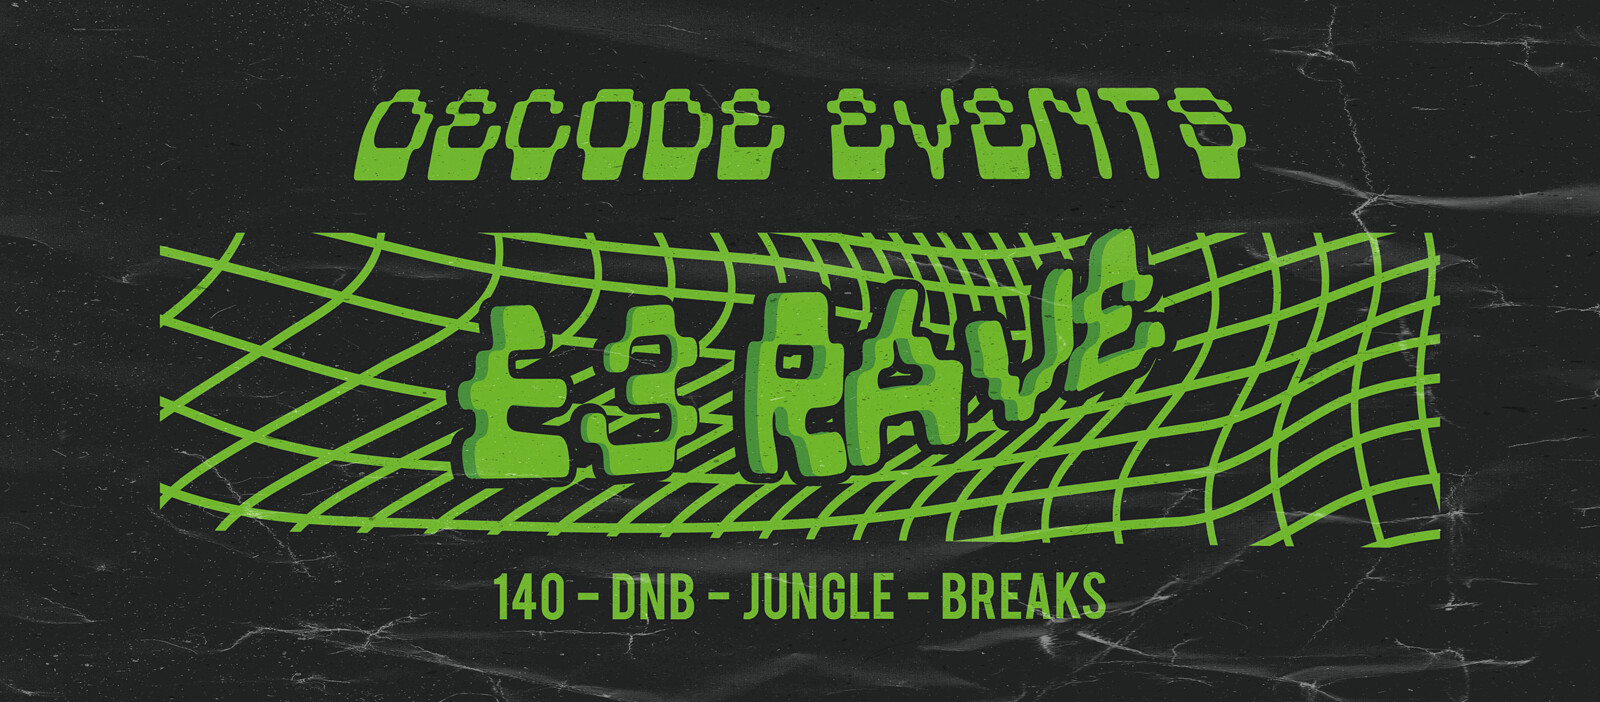 Decode Events:  £3 Rave at Take Five Cafe